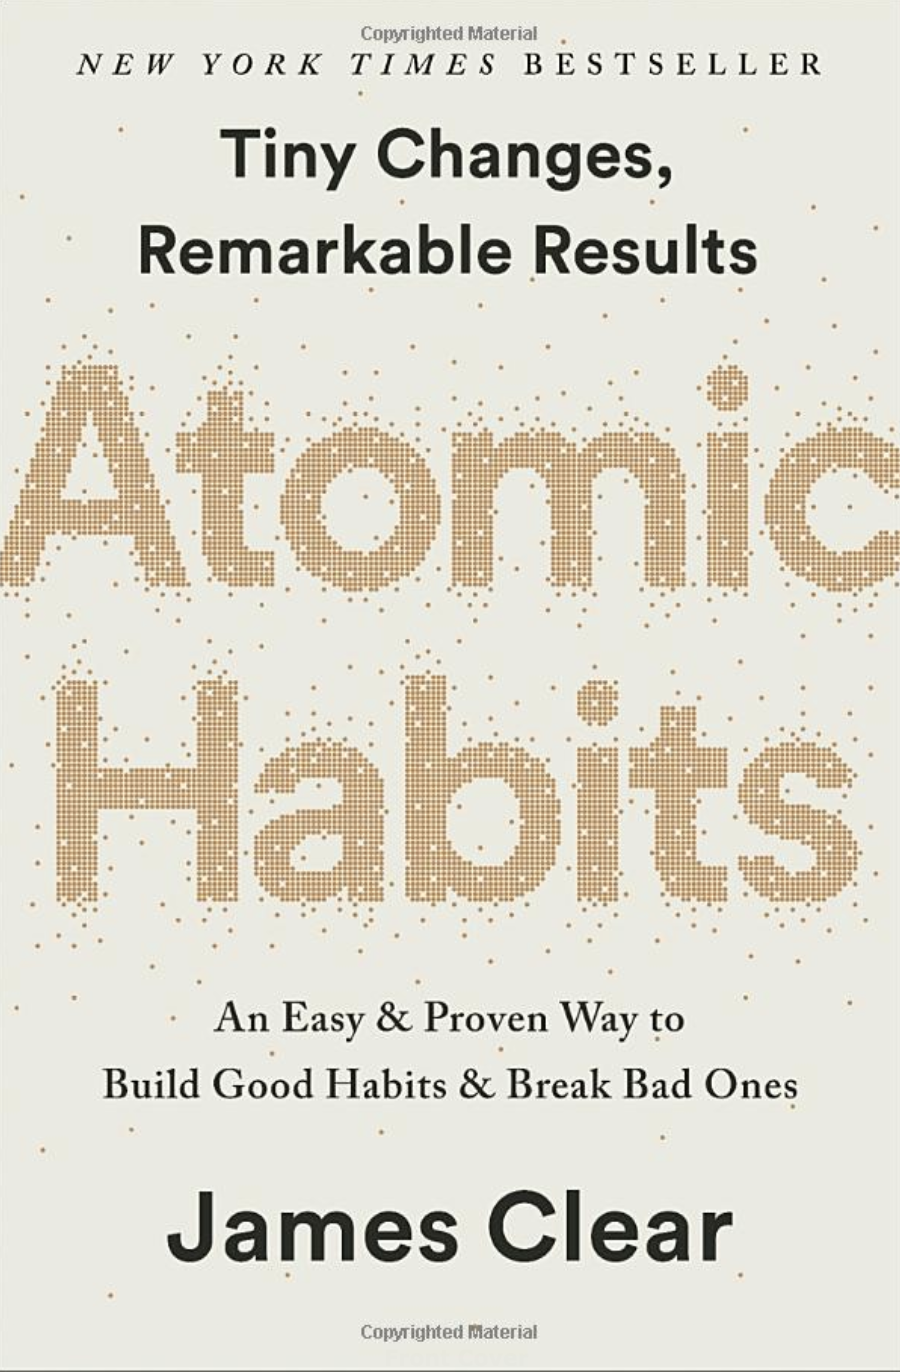 Atomic Habits by James Clear Book for Bloggers to Read